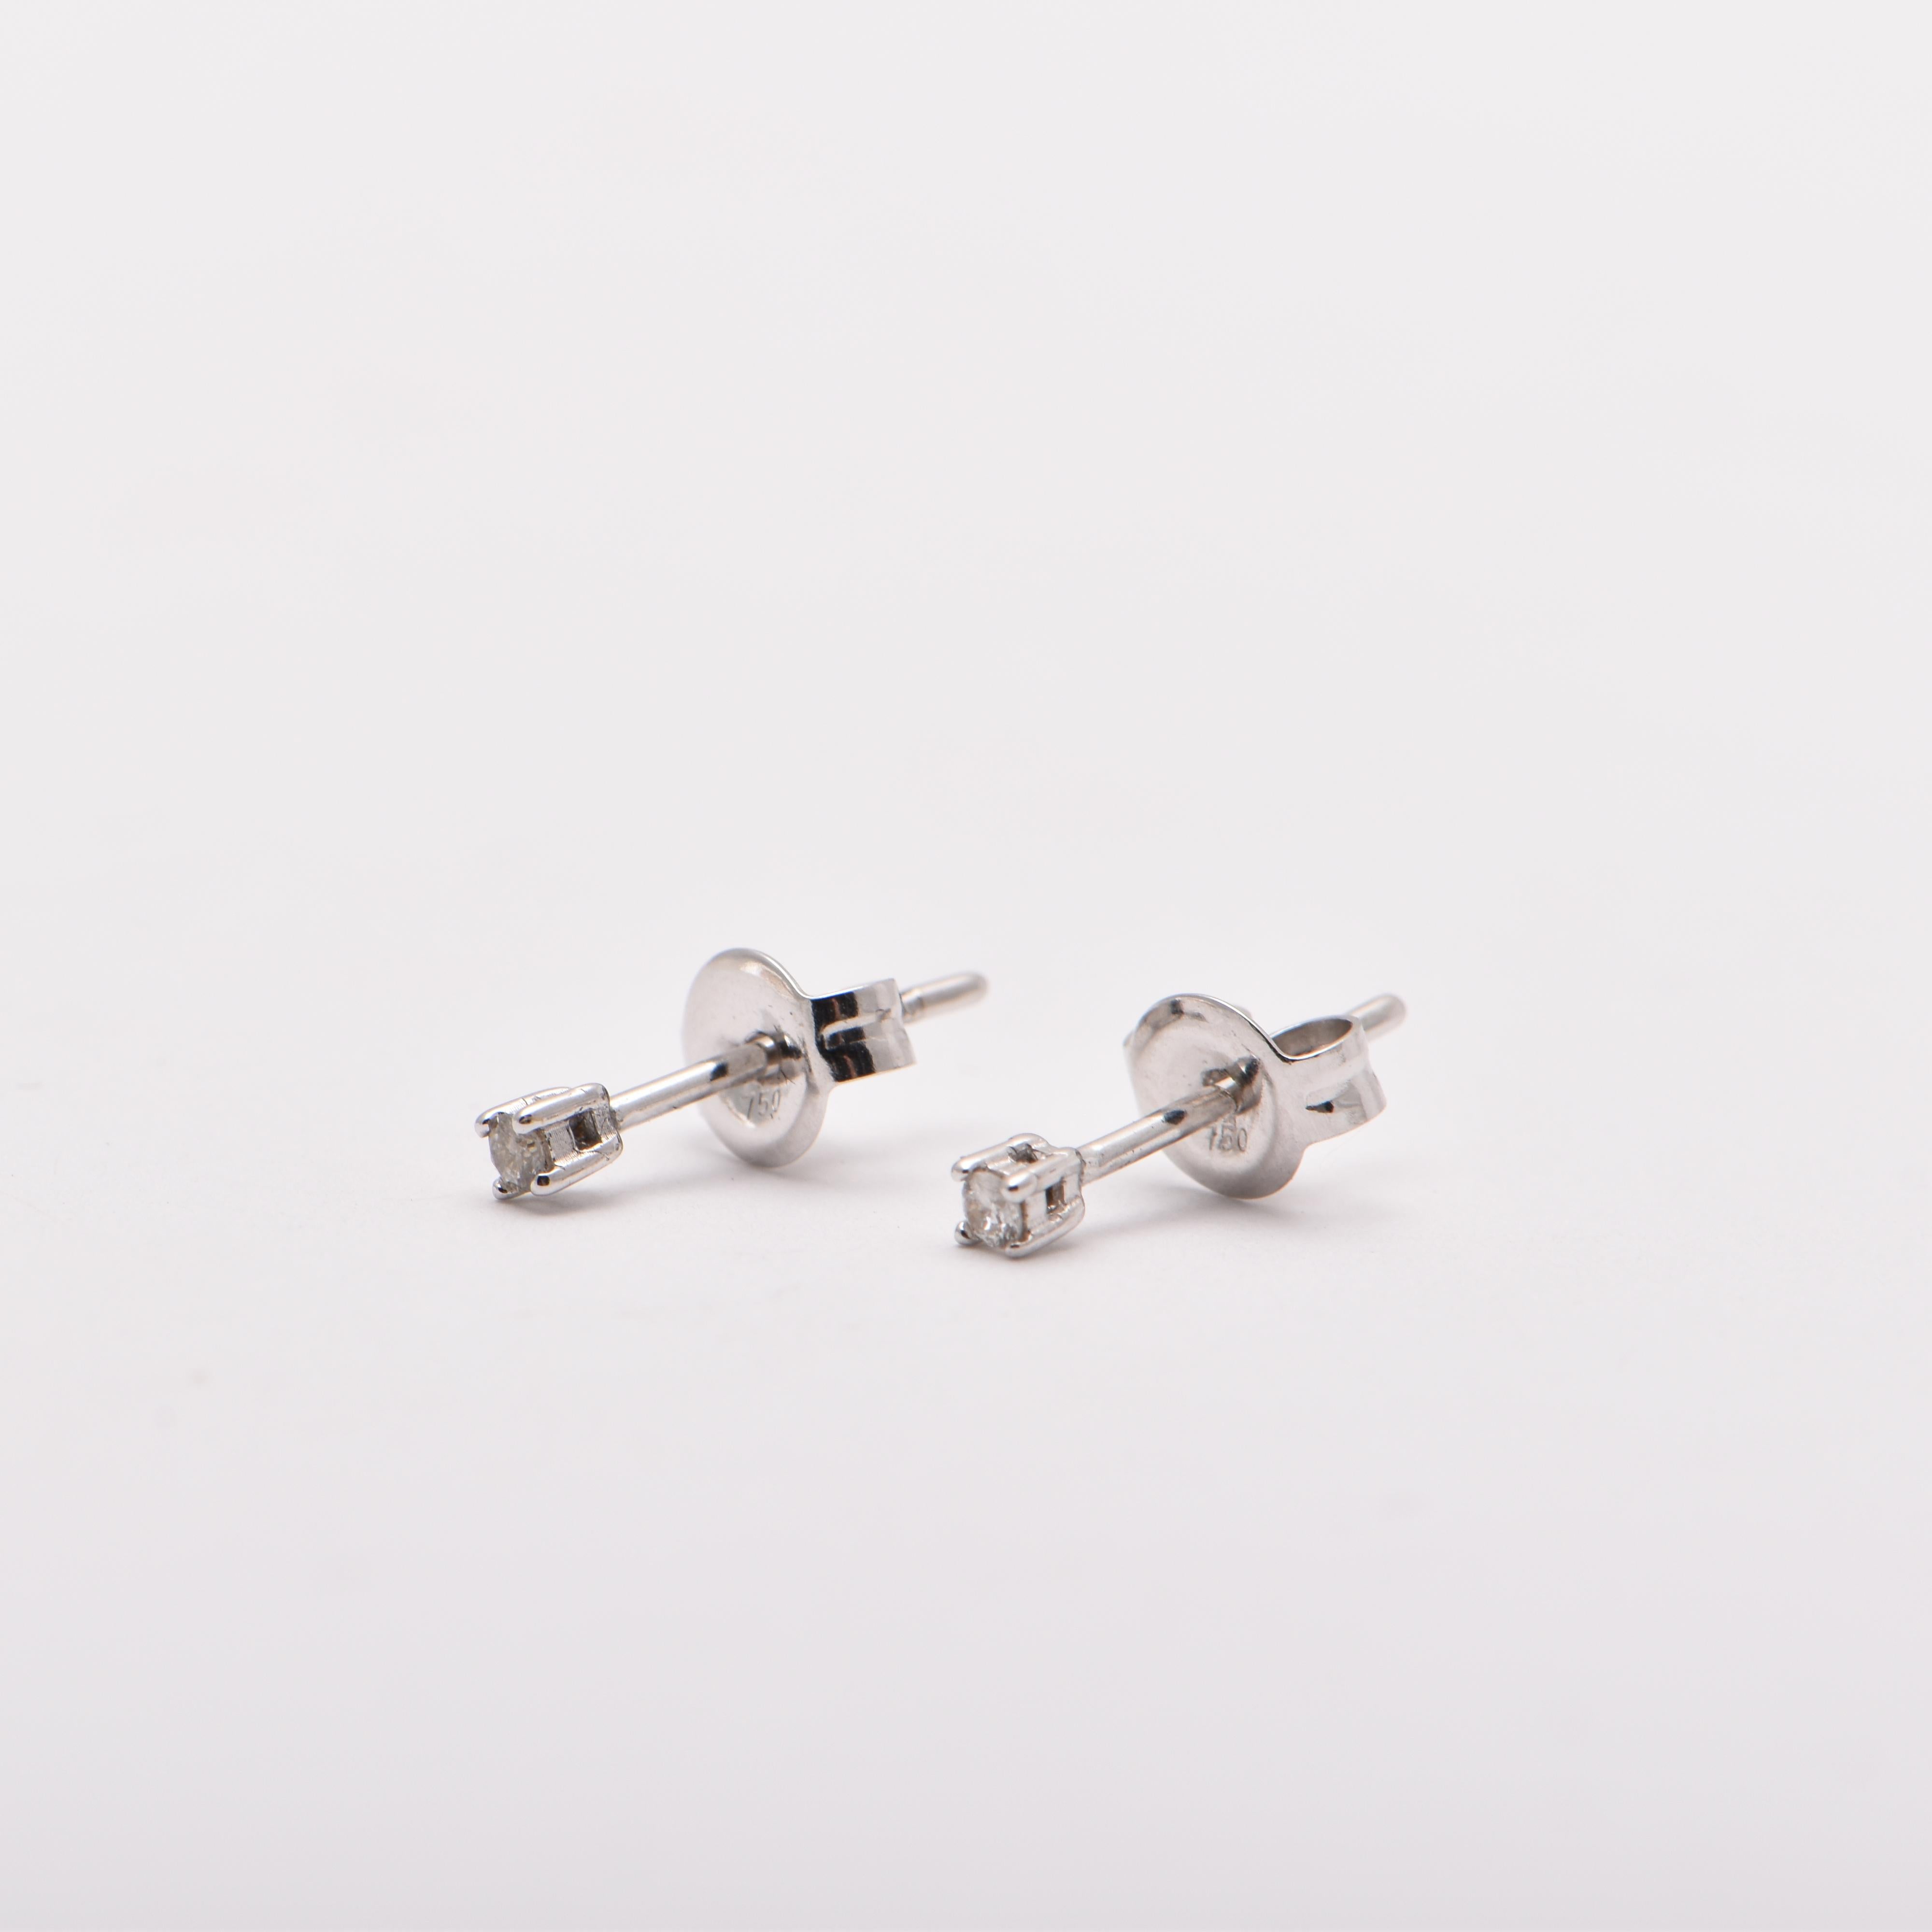 0.03 Carat Diamond Studs in 18 Carat White Gold by Cartmer Jewellery   

2 Diamonds totalling 0.03 carats   

FREE express postage usually 3-4 days Sydney to New York  
FREE international insurance  
by Cartmer Jewellery, The Dymocks Building, Sydney